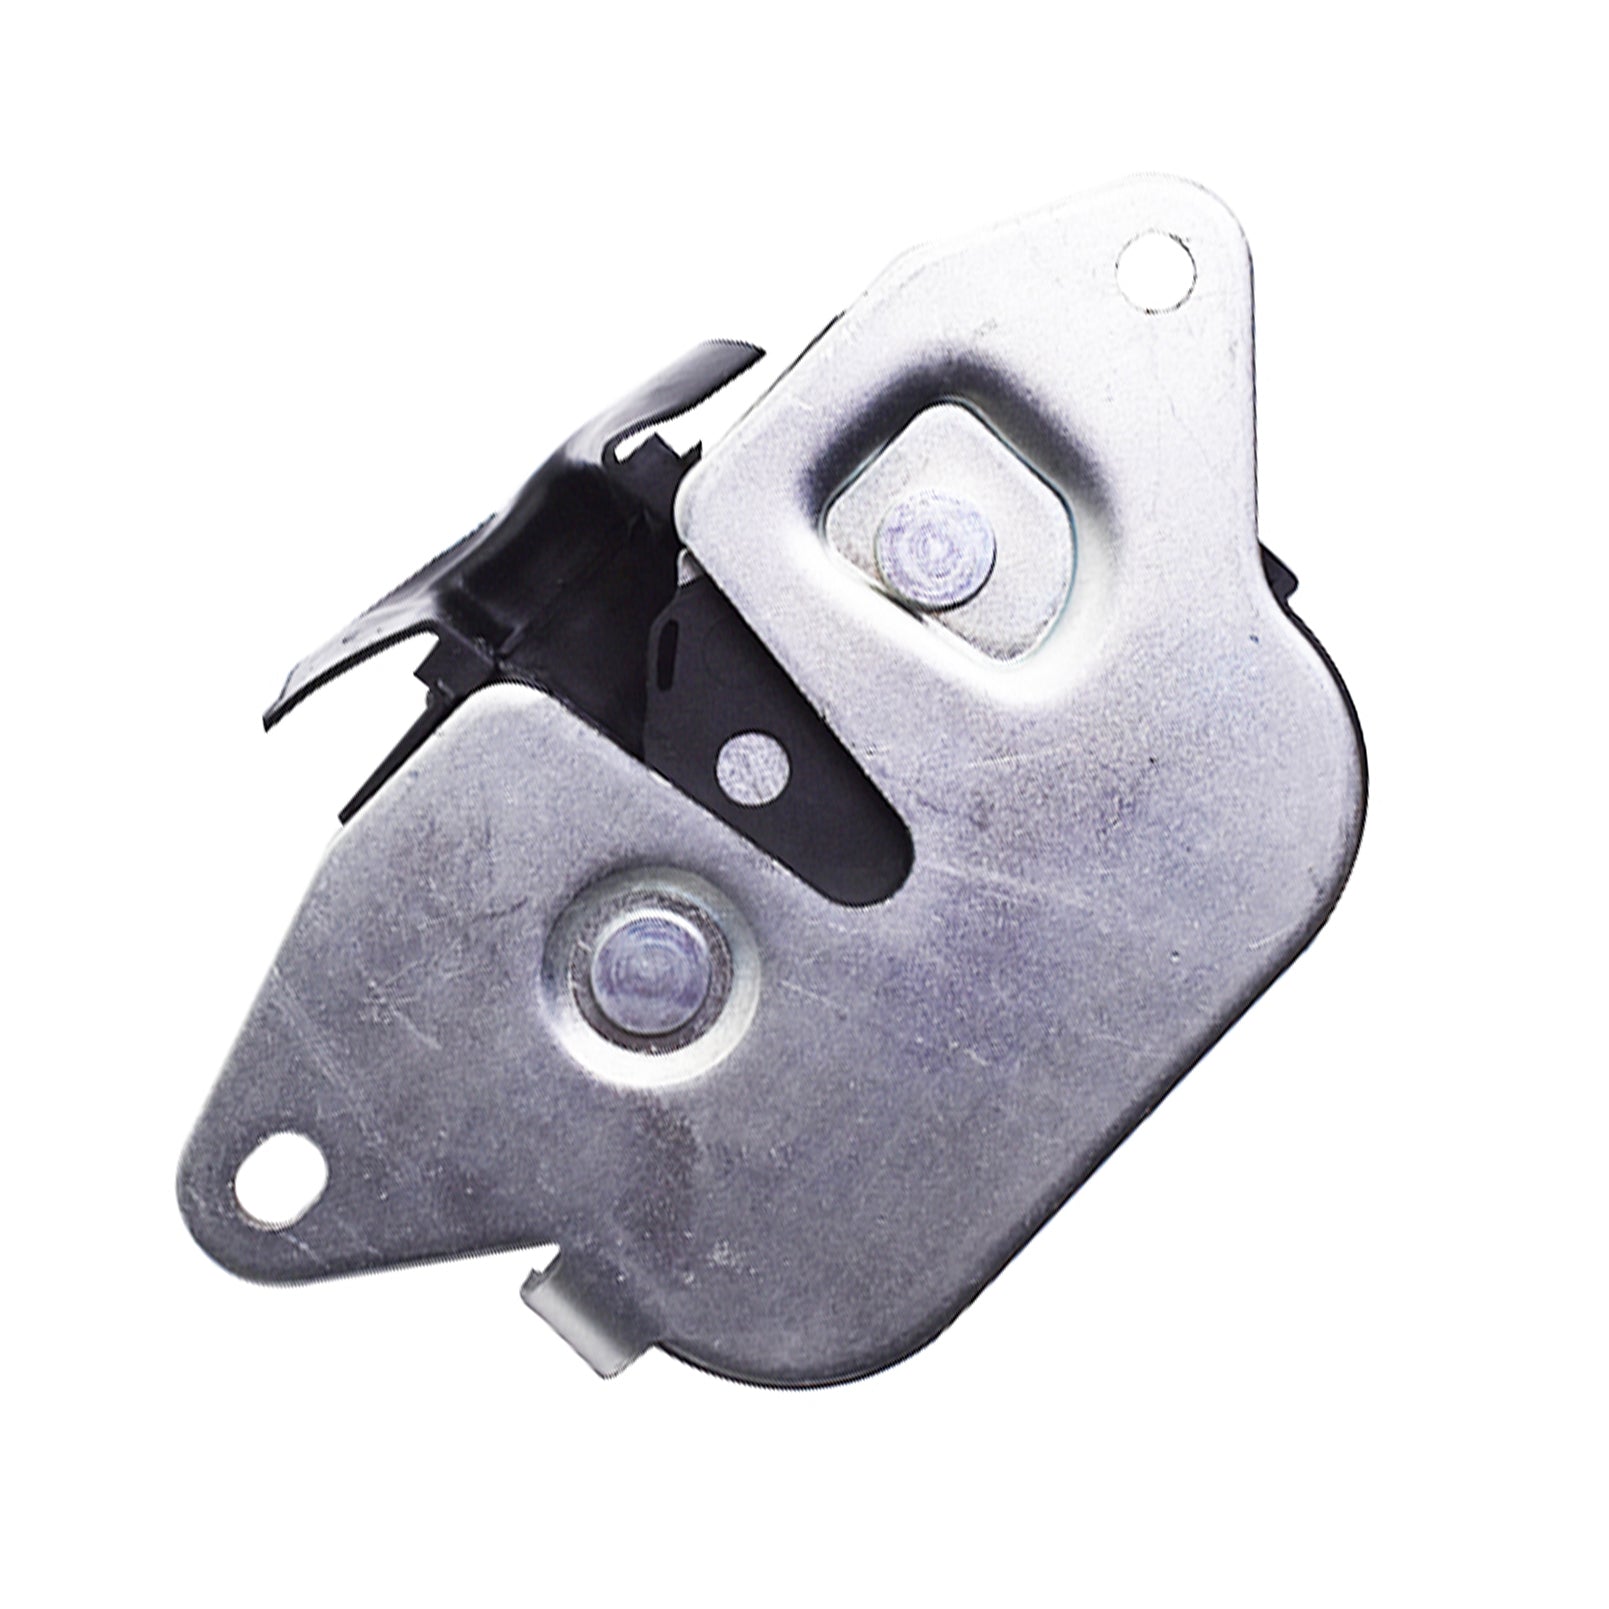 Rear Door Extended Cab Lower Latch Lock 20995801 For 2007-2013 Chevrolet